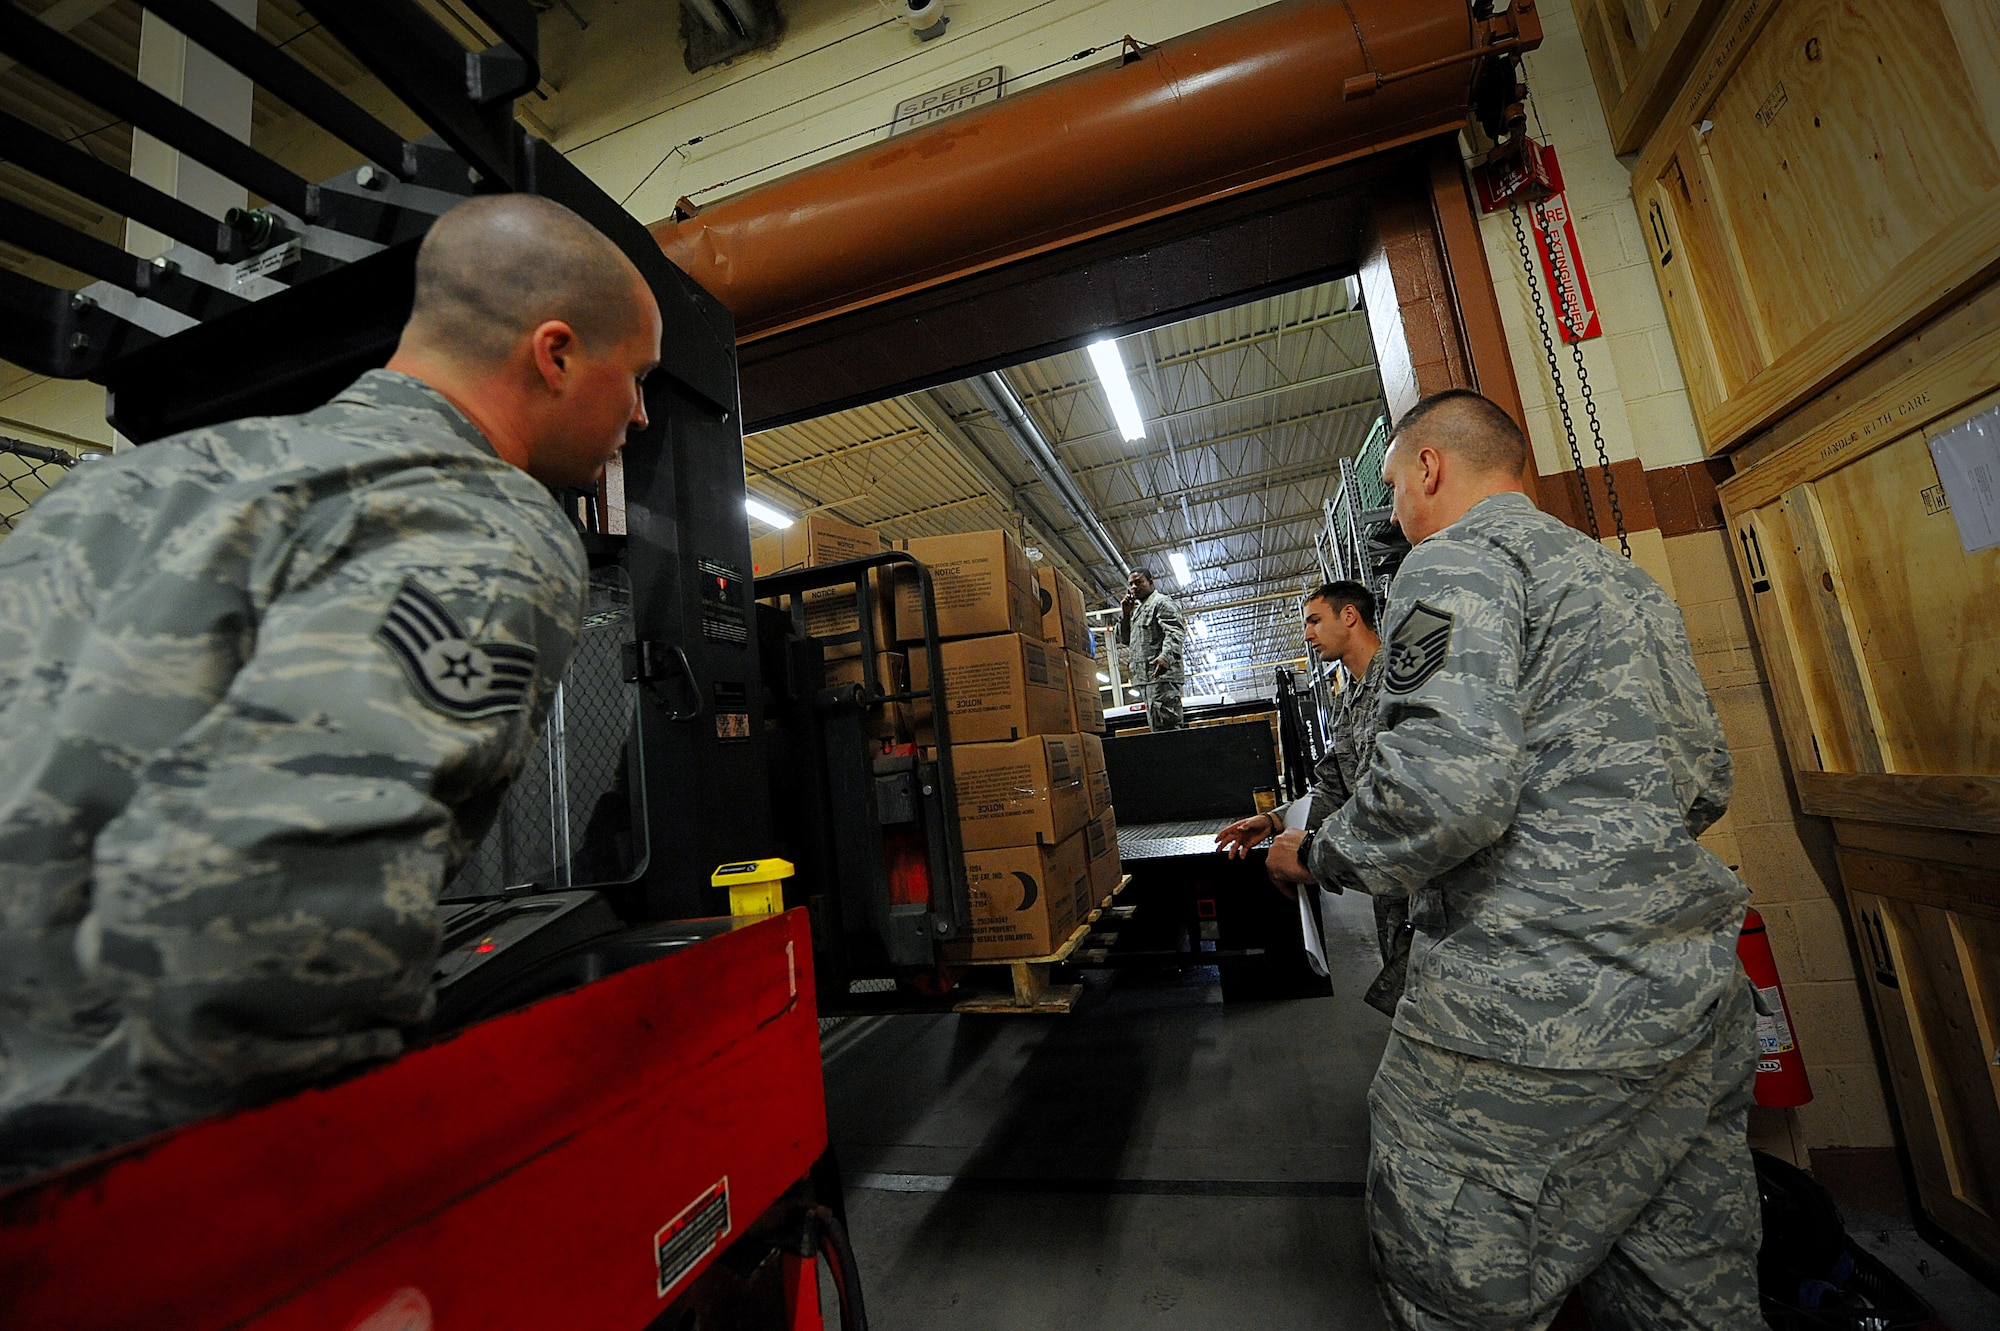 MOODY AIR FORCE BASE, Ga. -- Staff Sgt. Joseph Brown, 820th Security Forces Group, moves a pallet of Meals, Ready to Eat onto a truck here Jan. 20. The rations of MREs and water will be issued to members of the 823rd Security Forces Squadron for their deployment to Haiti. (U.S. Air Force photo by Senior Airman Gina Chiaverotti-Paige) 
